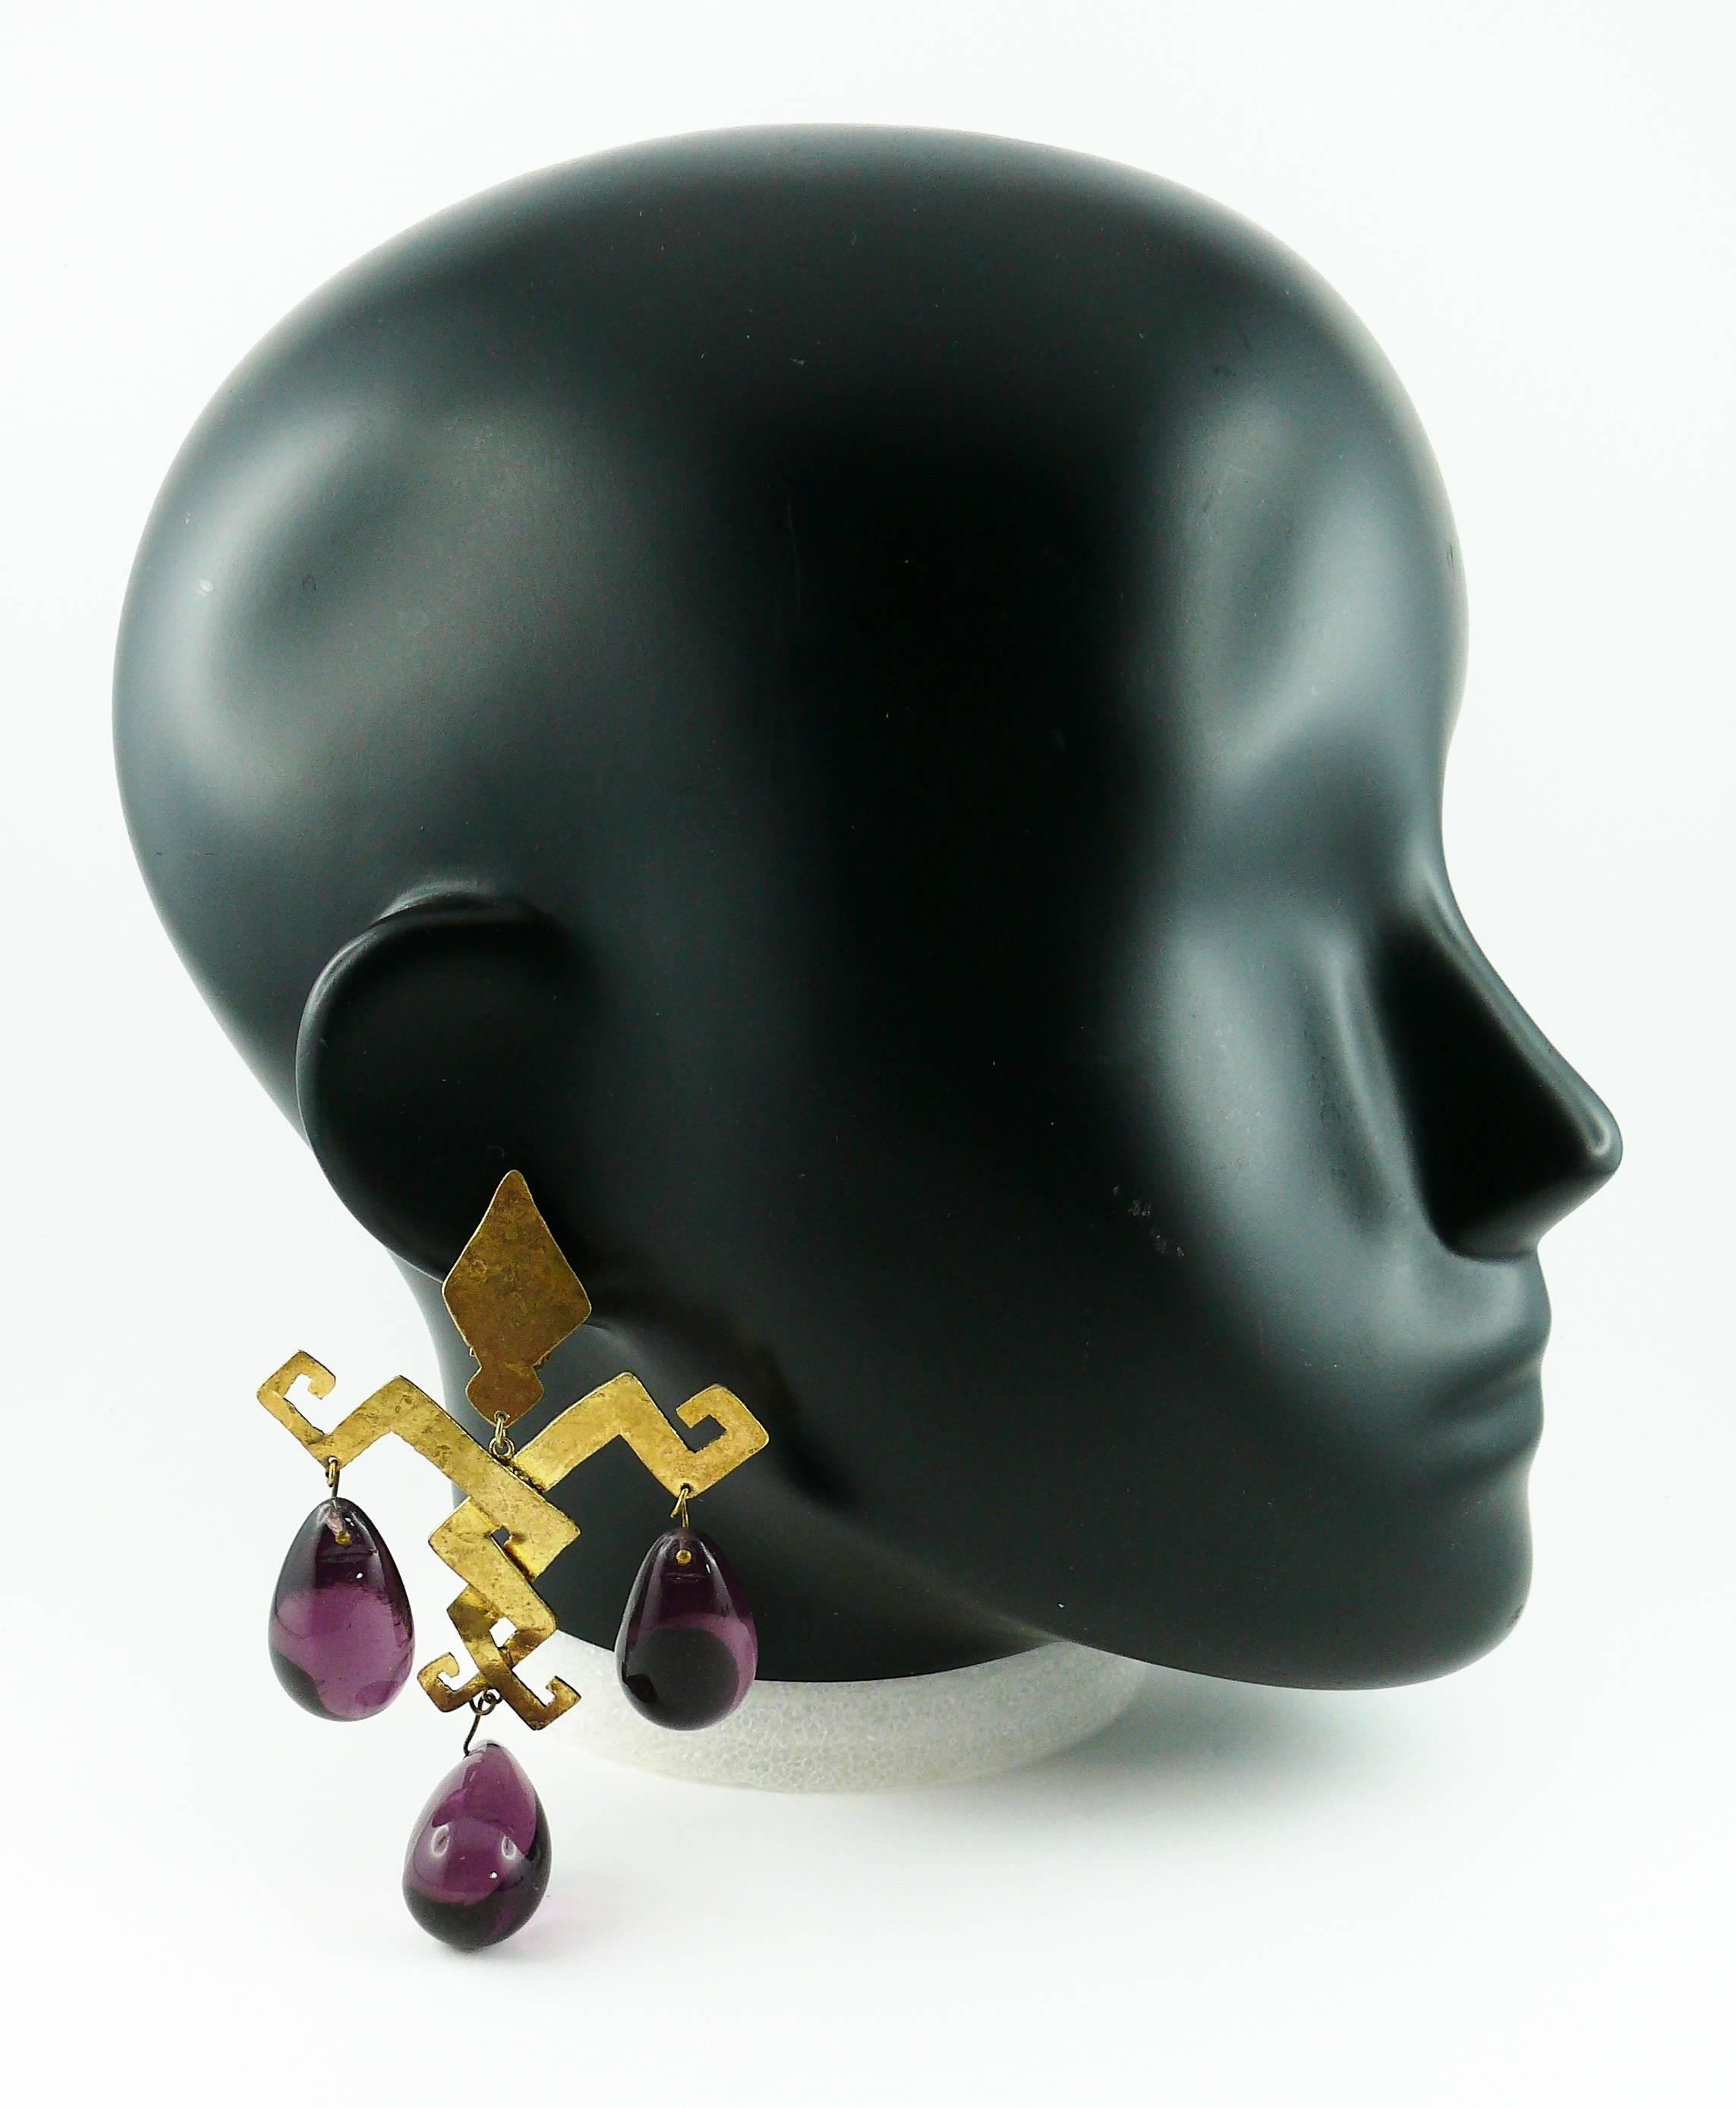 HERVE VAN DER STRAETEN vintage massive chandelier earrings (clip-on) featuring a geometrical gilt brass structure with large purple glass drops.

Marked VAN DER STRAETEN.

Indicative weight per earring : 40 grams.

JEWELRY CONDITION CHART
-